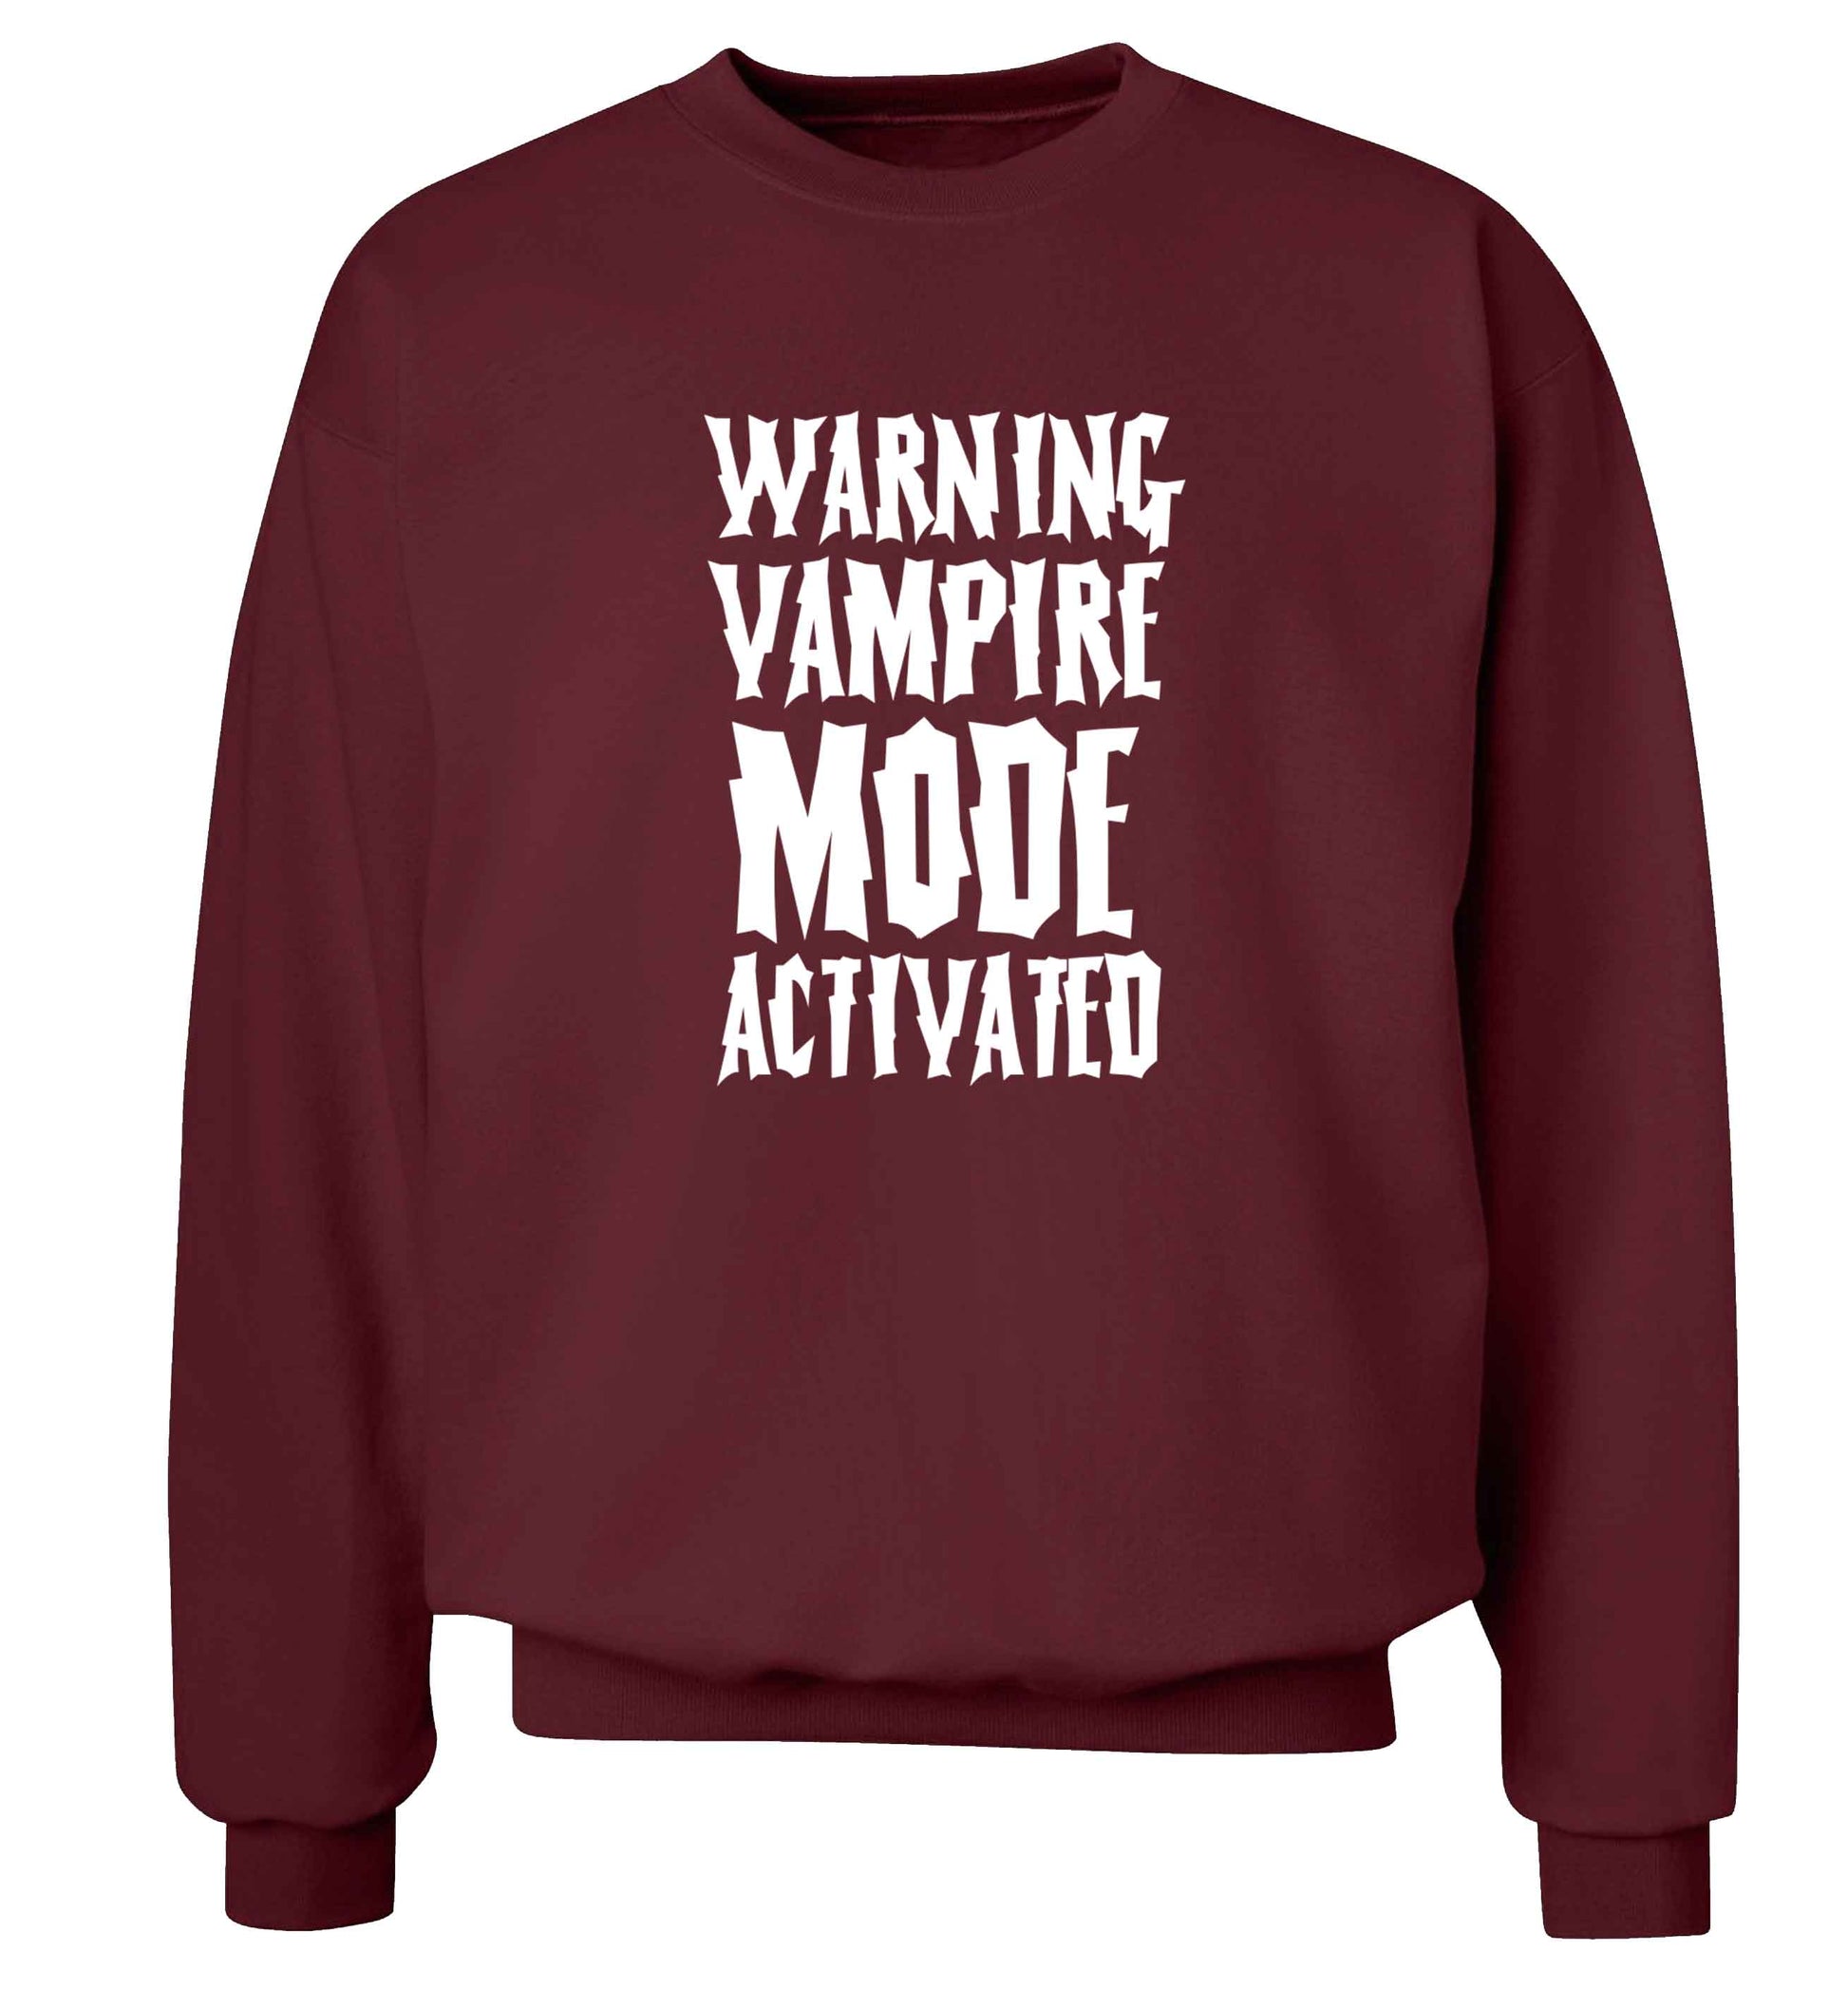 Warning vampire mode activated adult's unisex maroon sweater 2XL